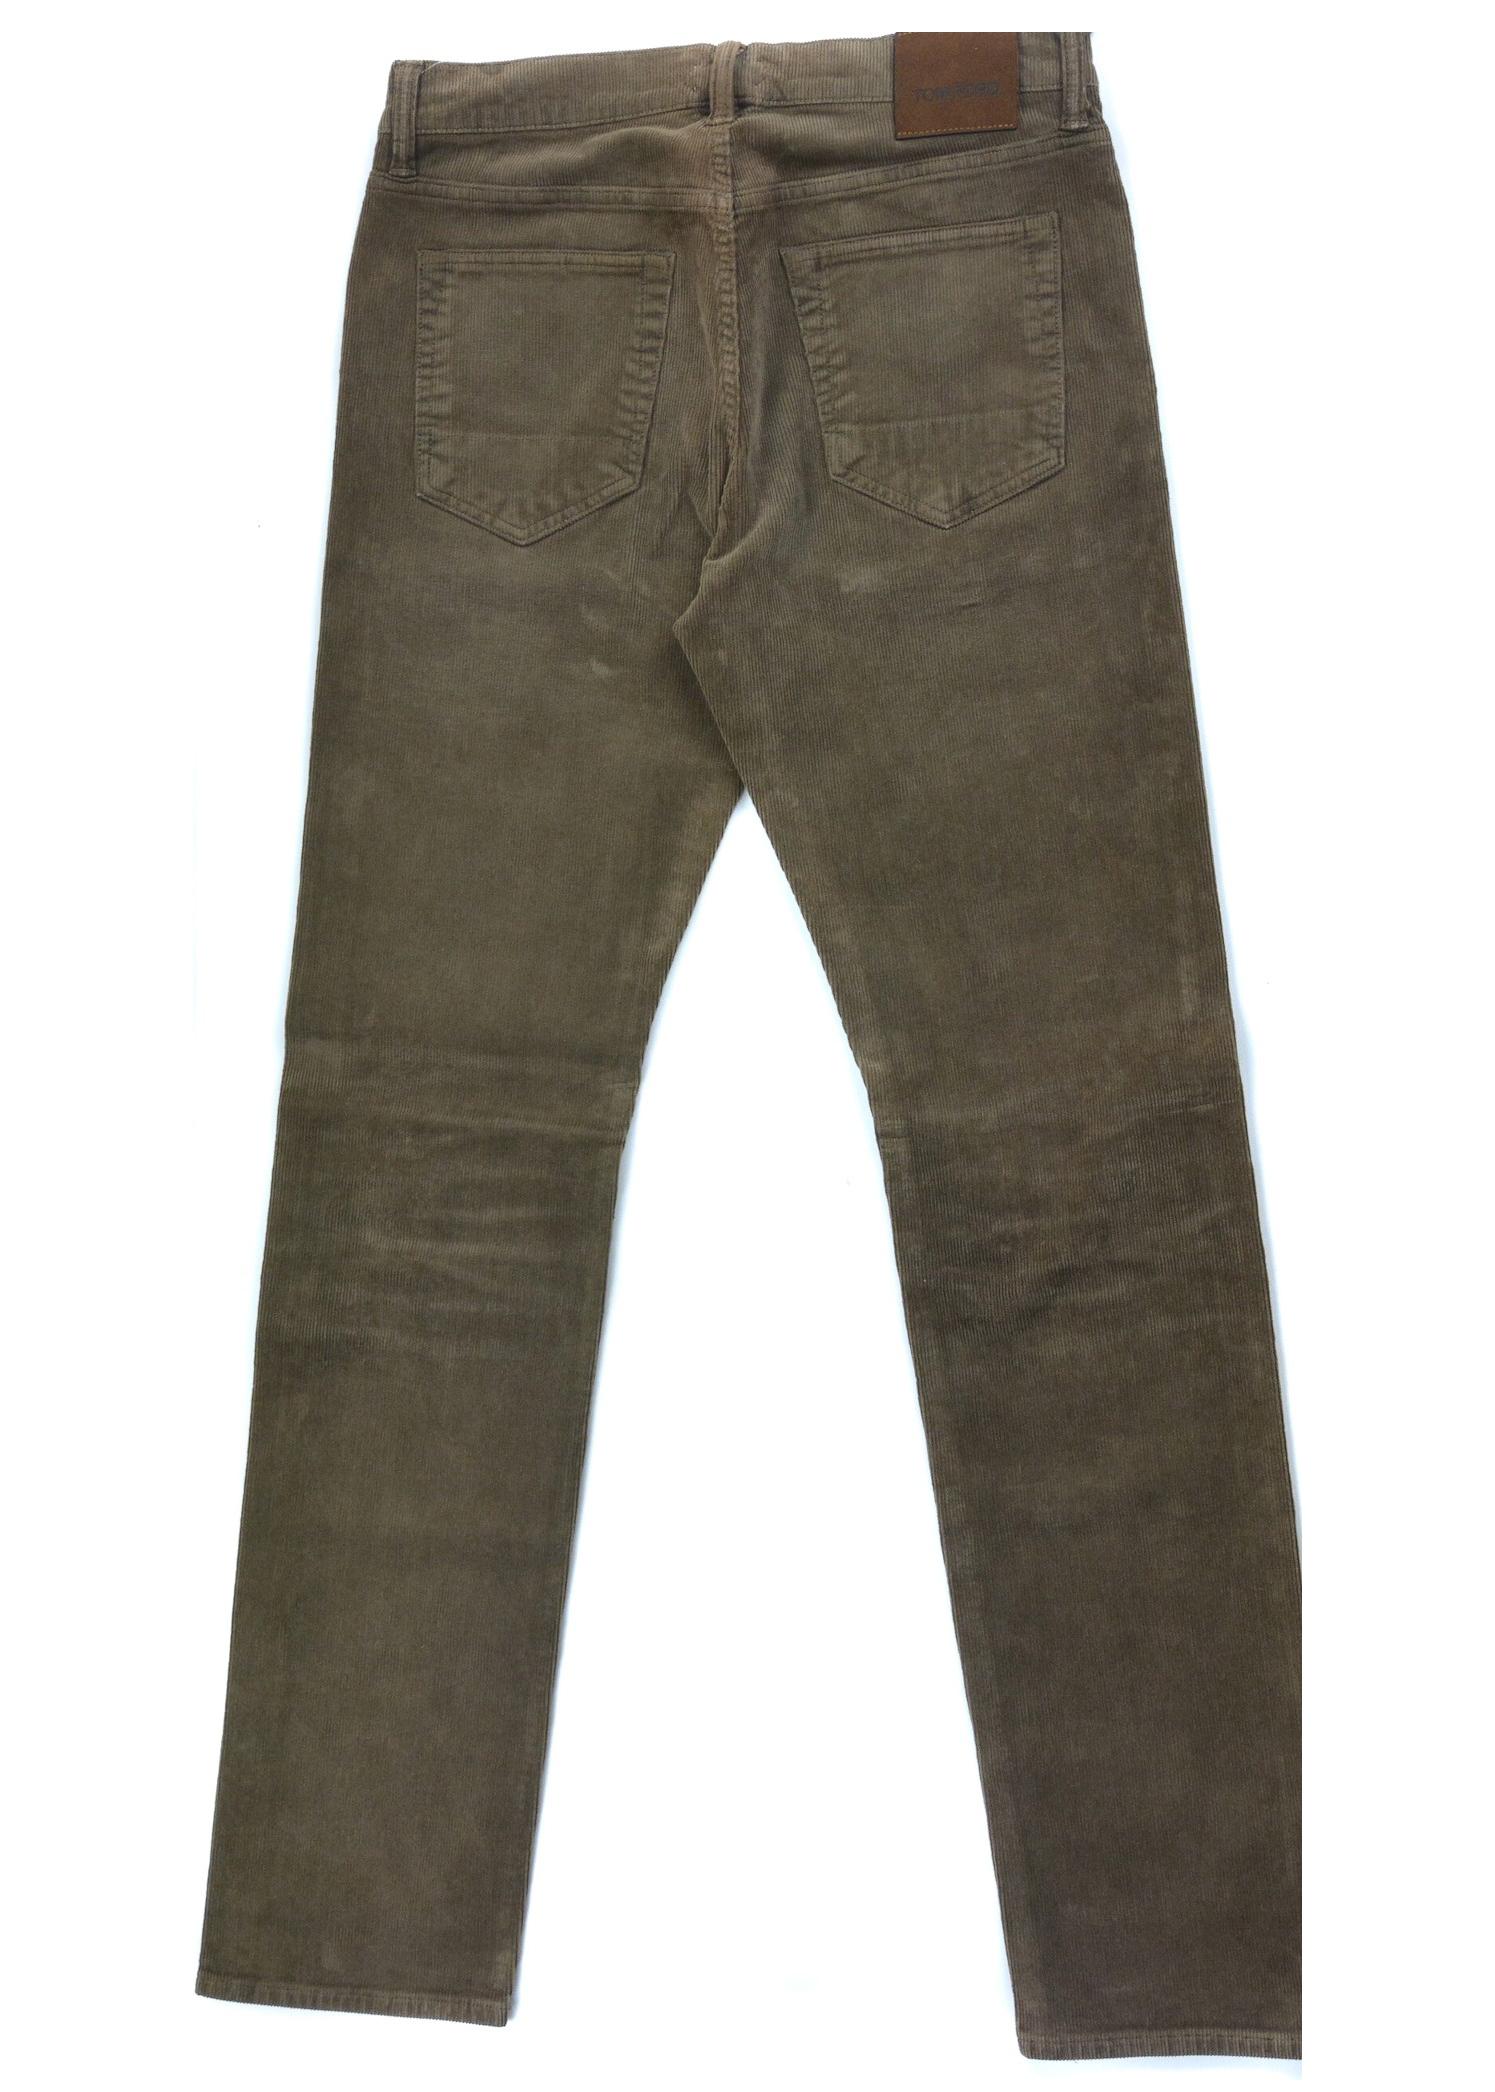 Tom Ford Straight Fit Corduroy pants are the ideal pair of pants for this season. These pants feature a earthy brown color, corduroy construction, and straight fit silhouette. You can pair these trousers with a crisp white t-shirt for the perfect